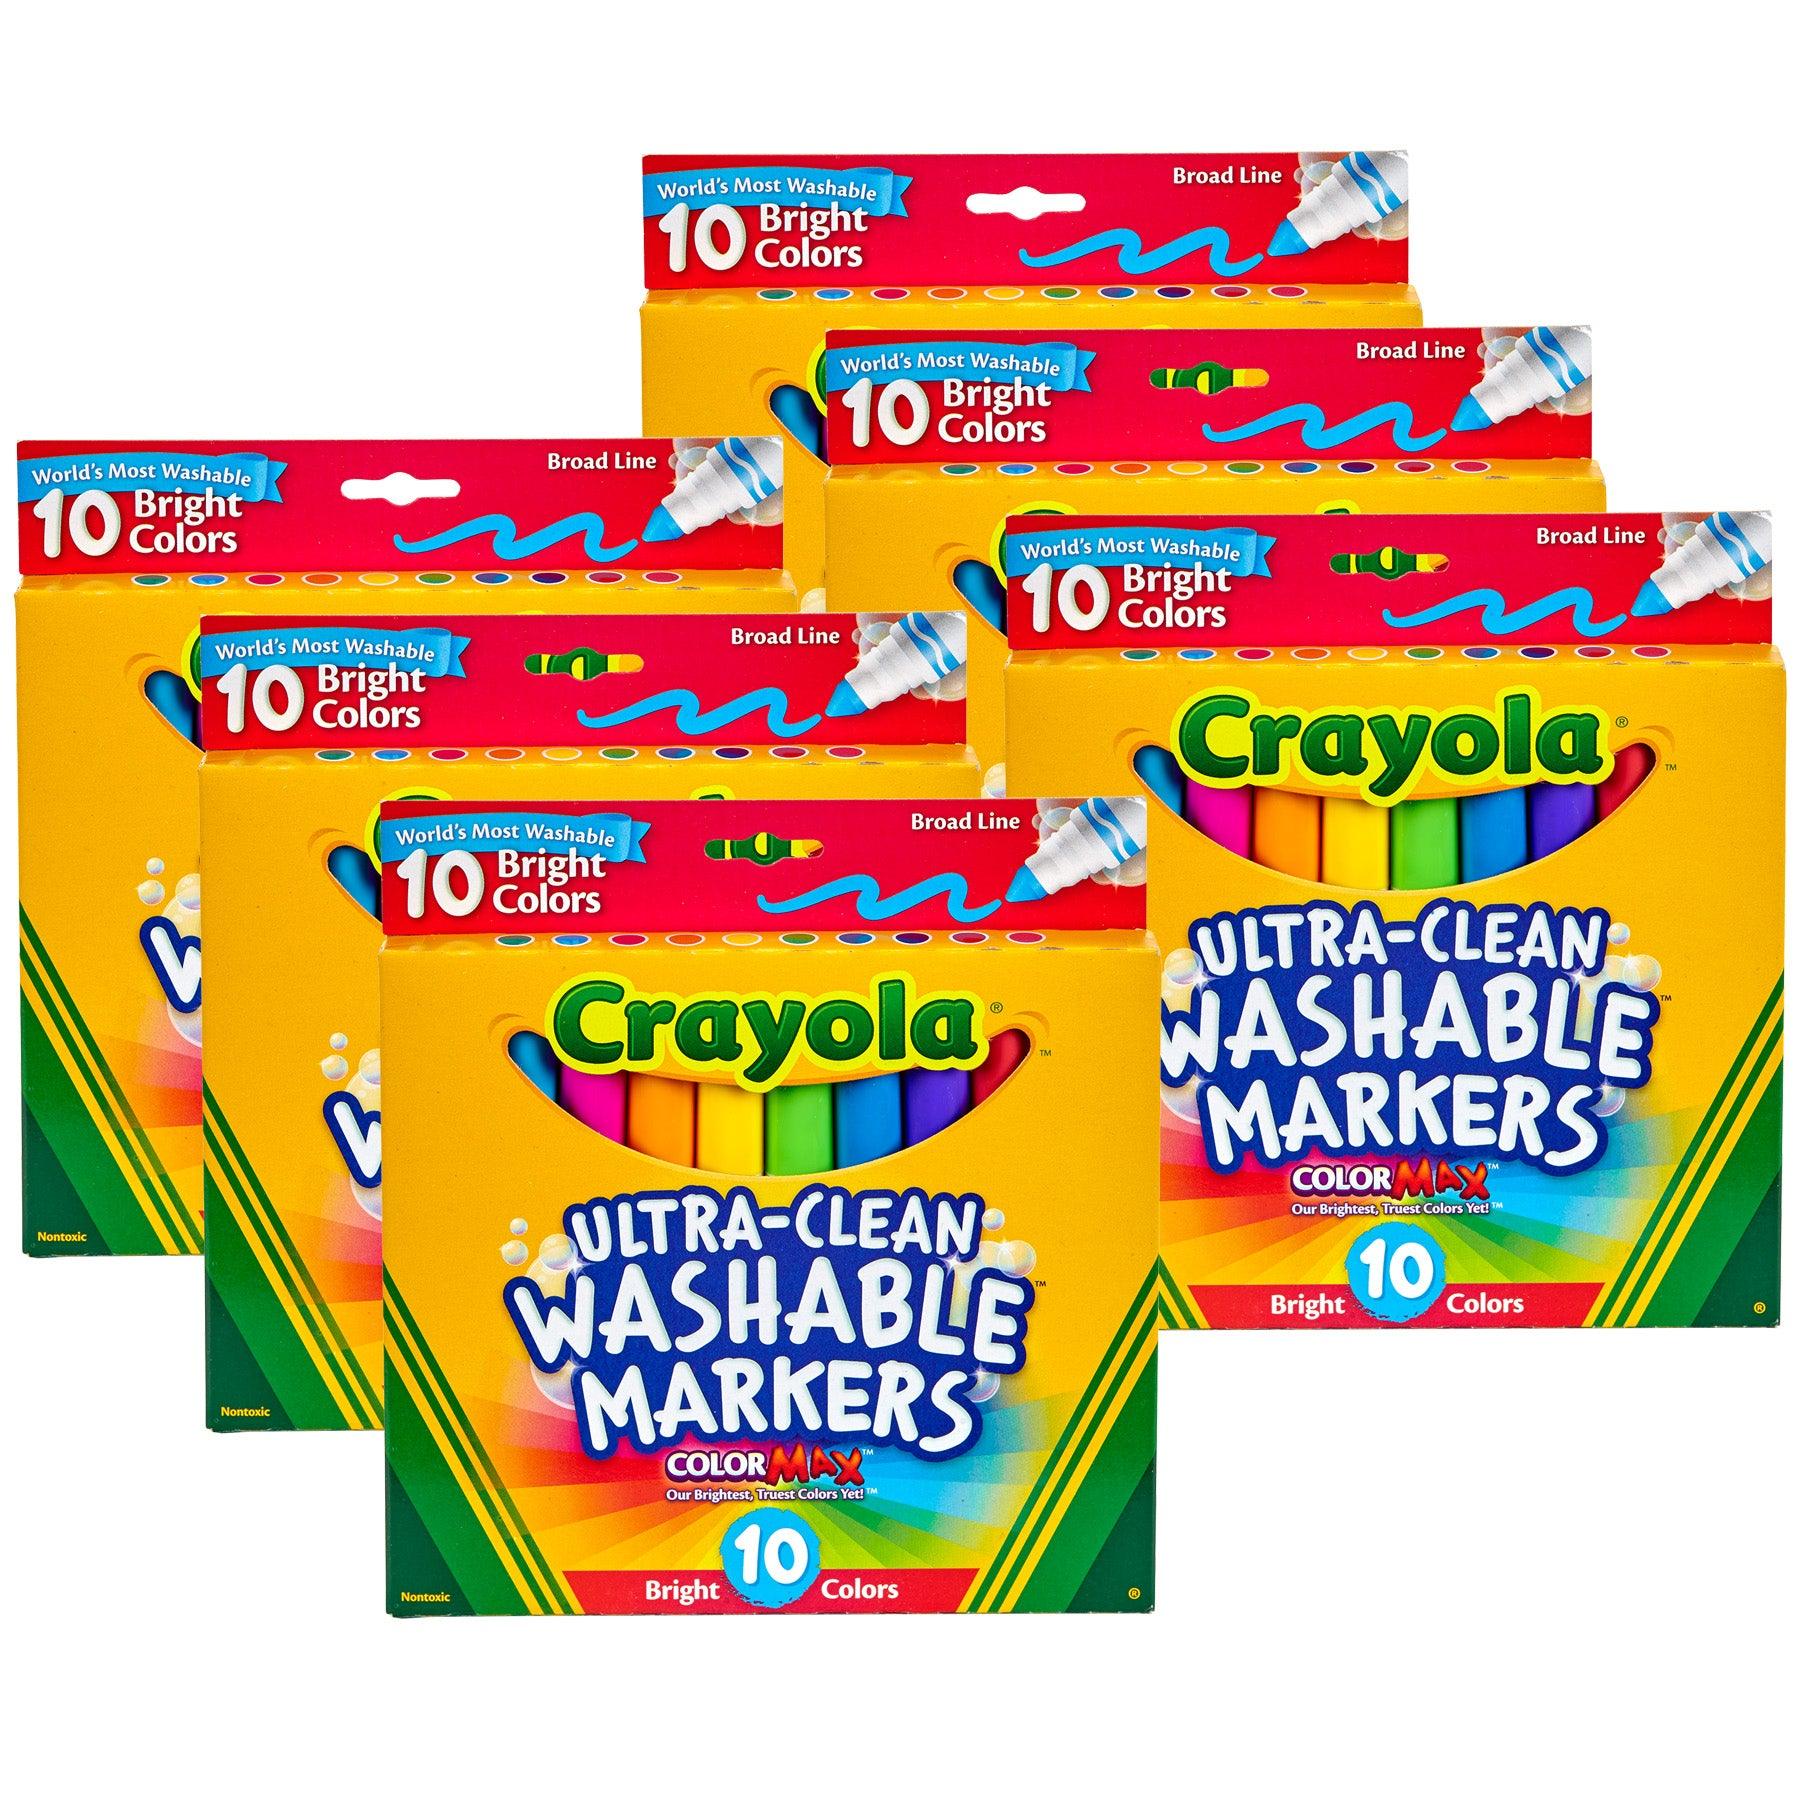 Ultra-Clean Washable Bright, Broad Line, Color Max Markers, 10 Per Pack, 6 Packs - Loomini